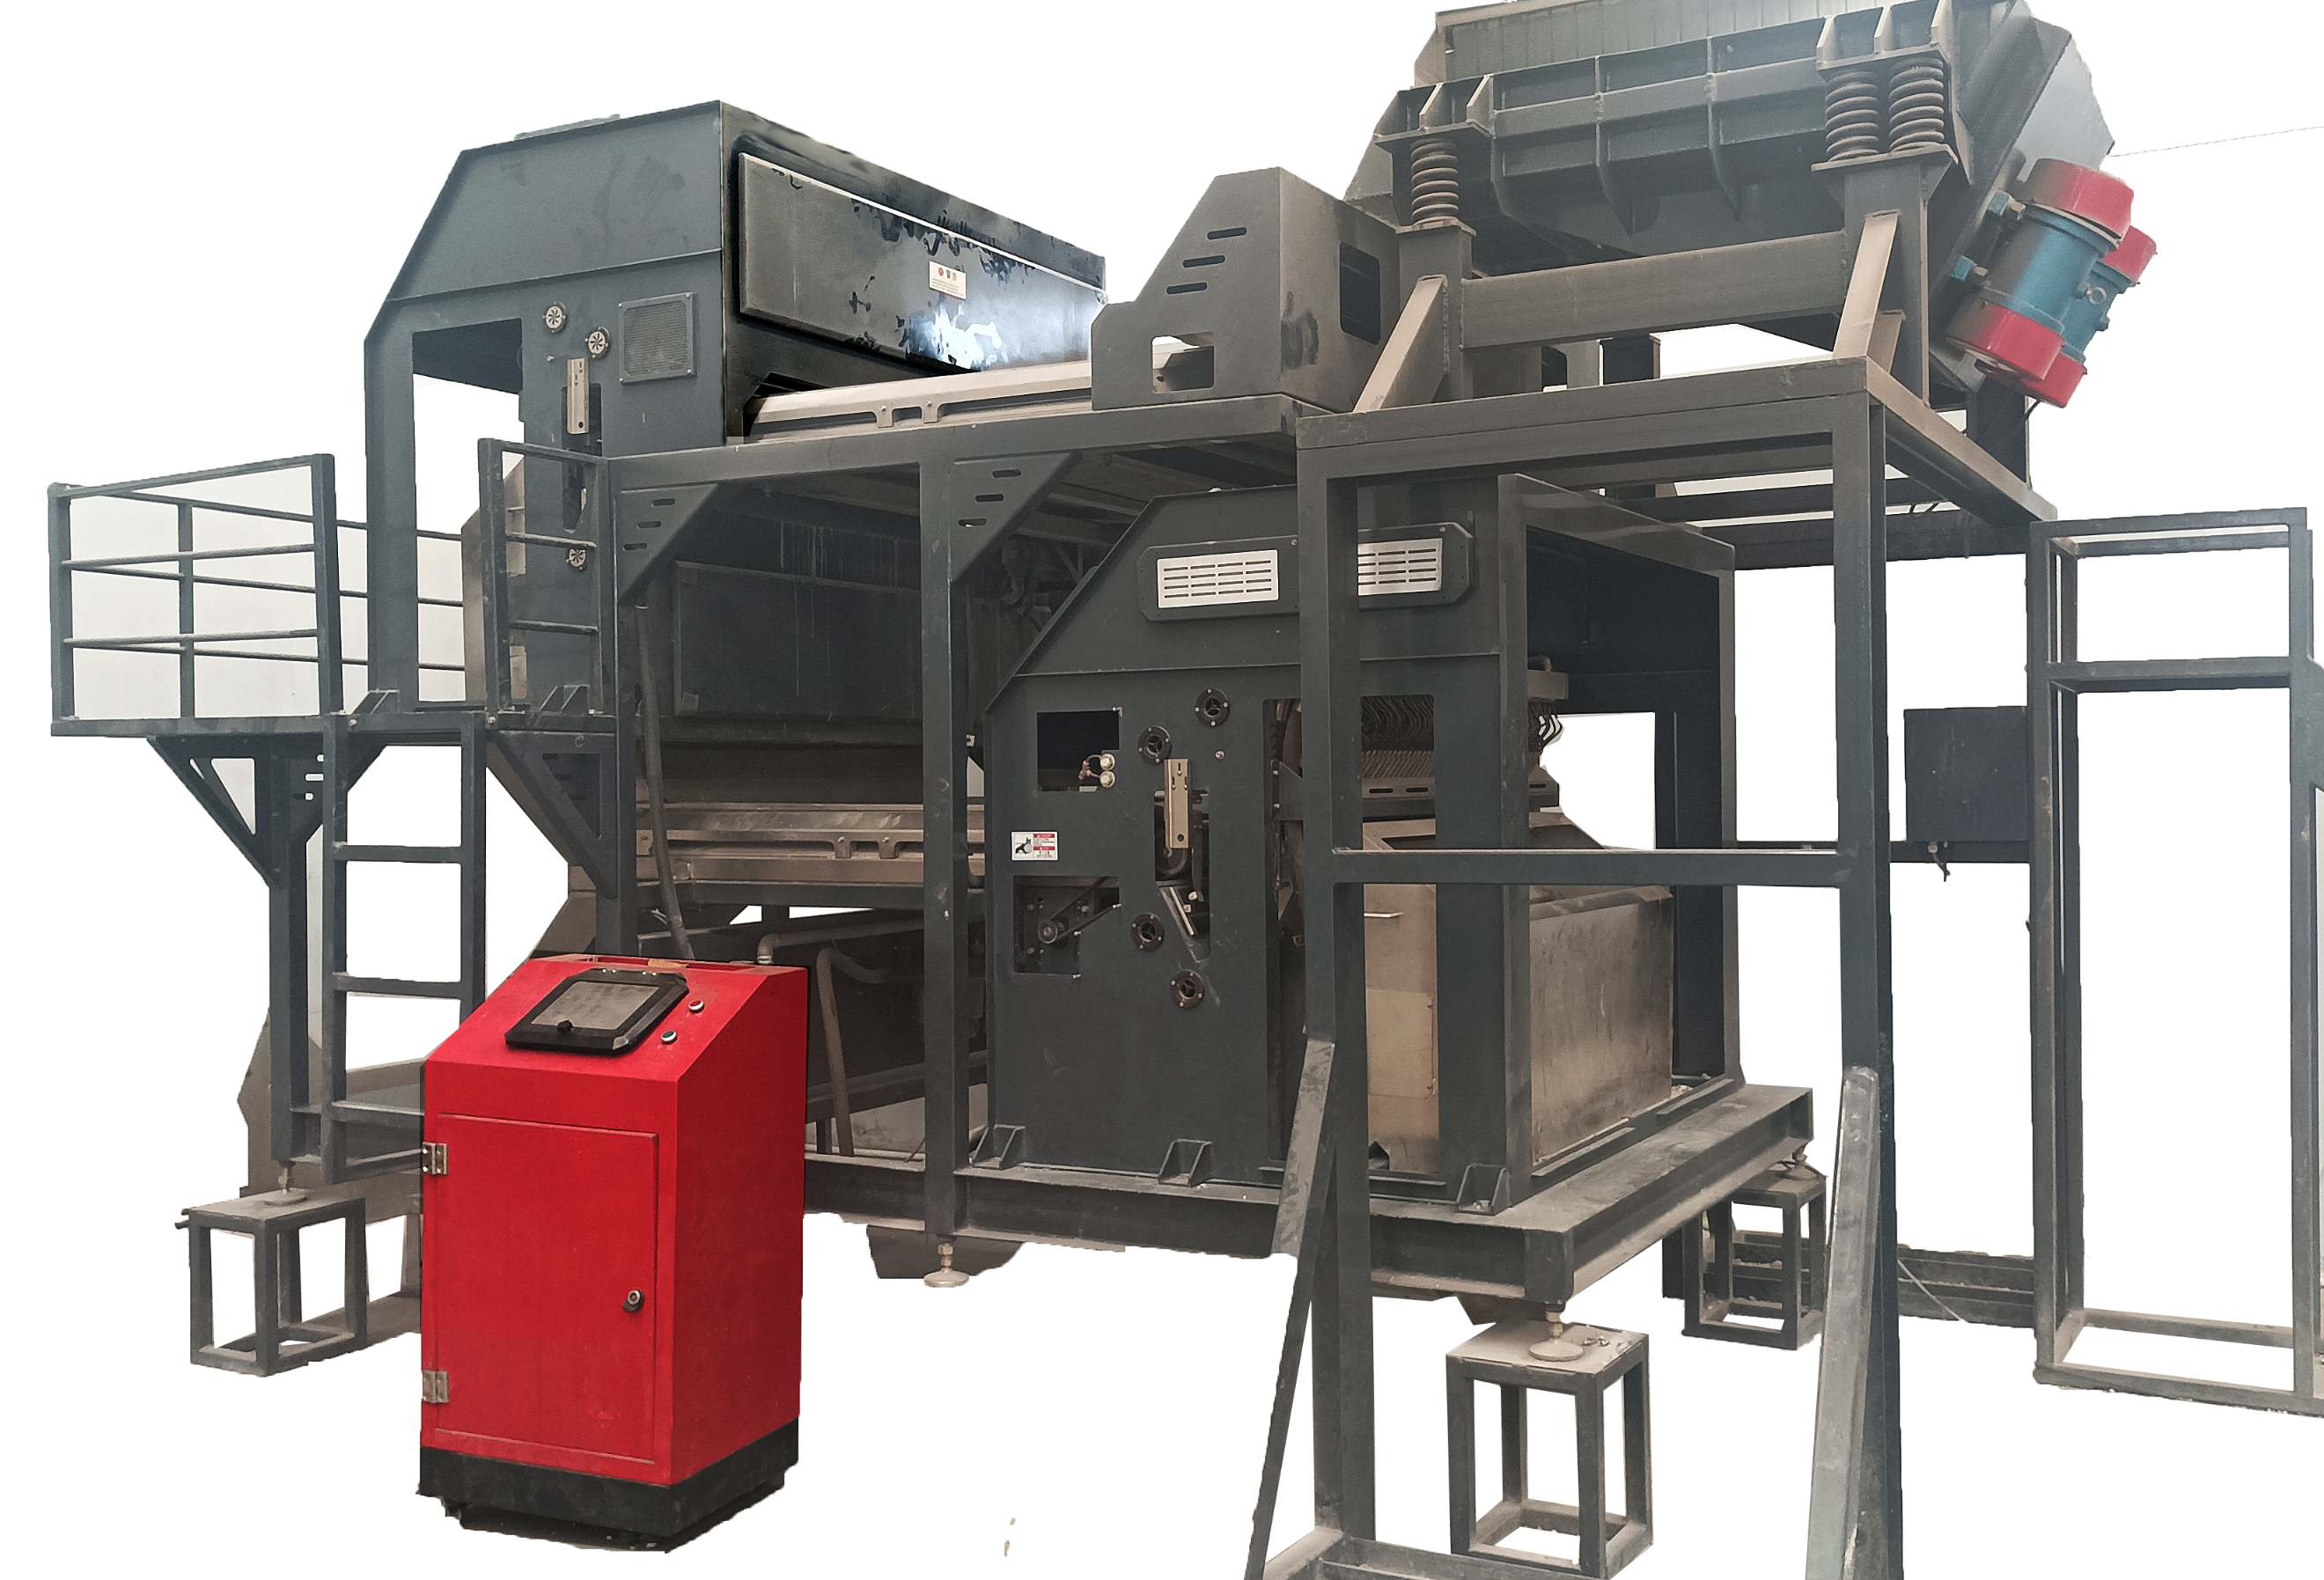 The Structure of Ore Color Sorter